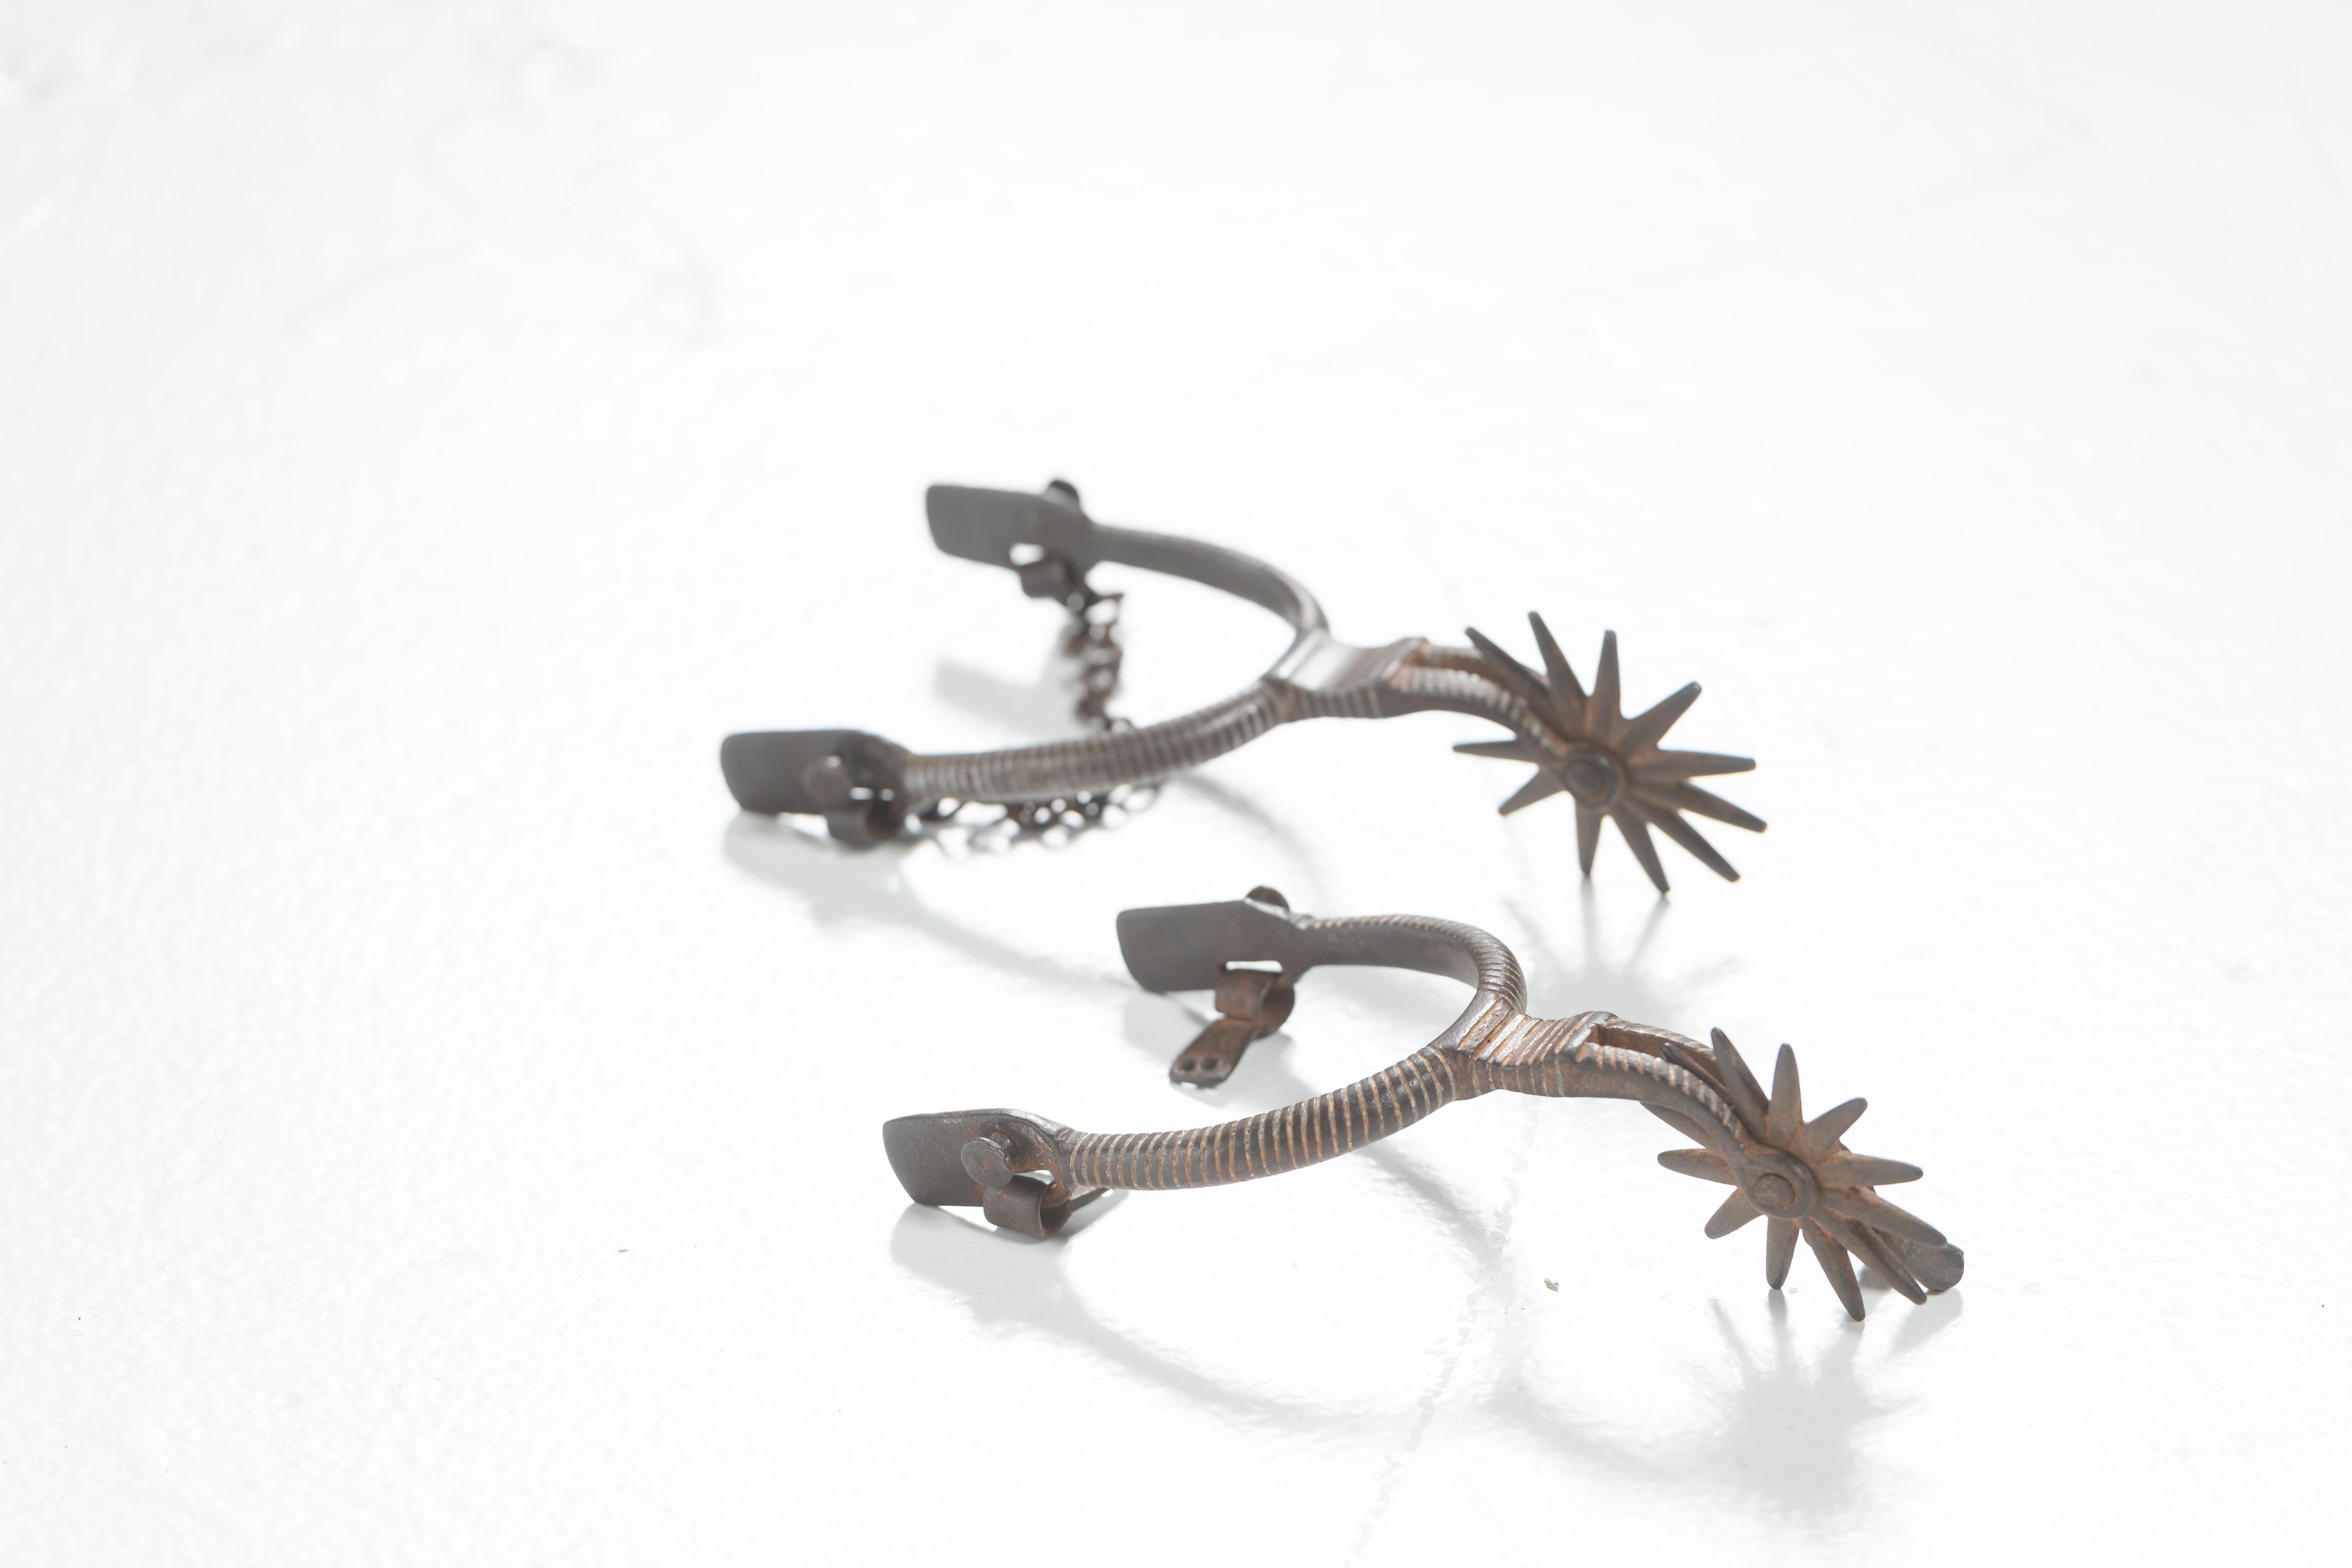 Pair of vintage cowboy spurs, thought to be of Mexican origin. Made in early 20th Century, the spurs are of iron inlaid with silver (content unknown) and have twelve-point star rowels. Great addition to any collection, cowboy or otherwise.